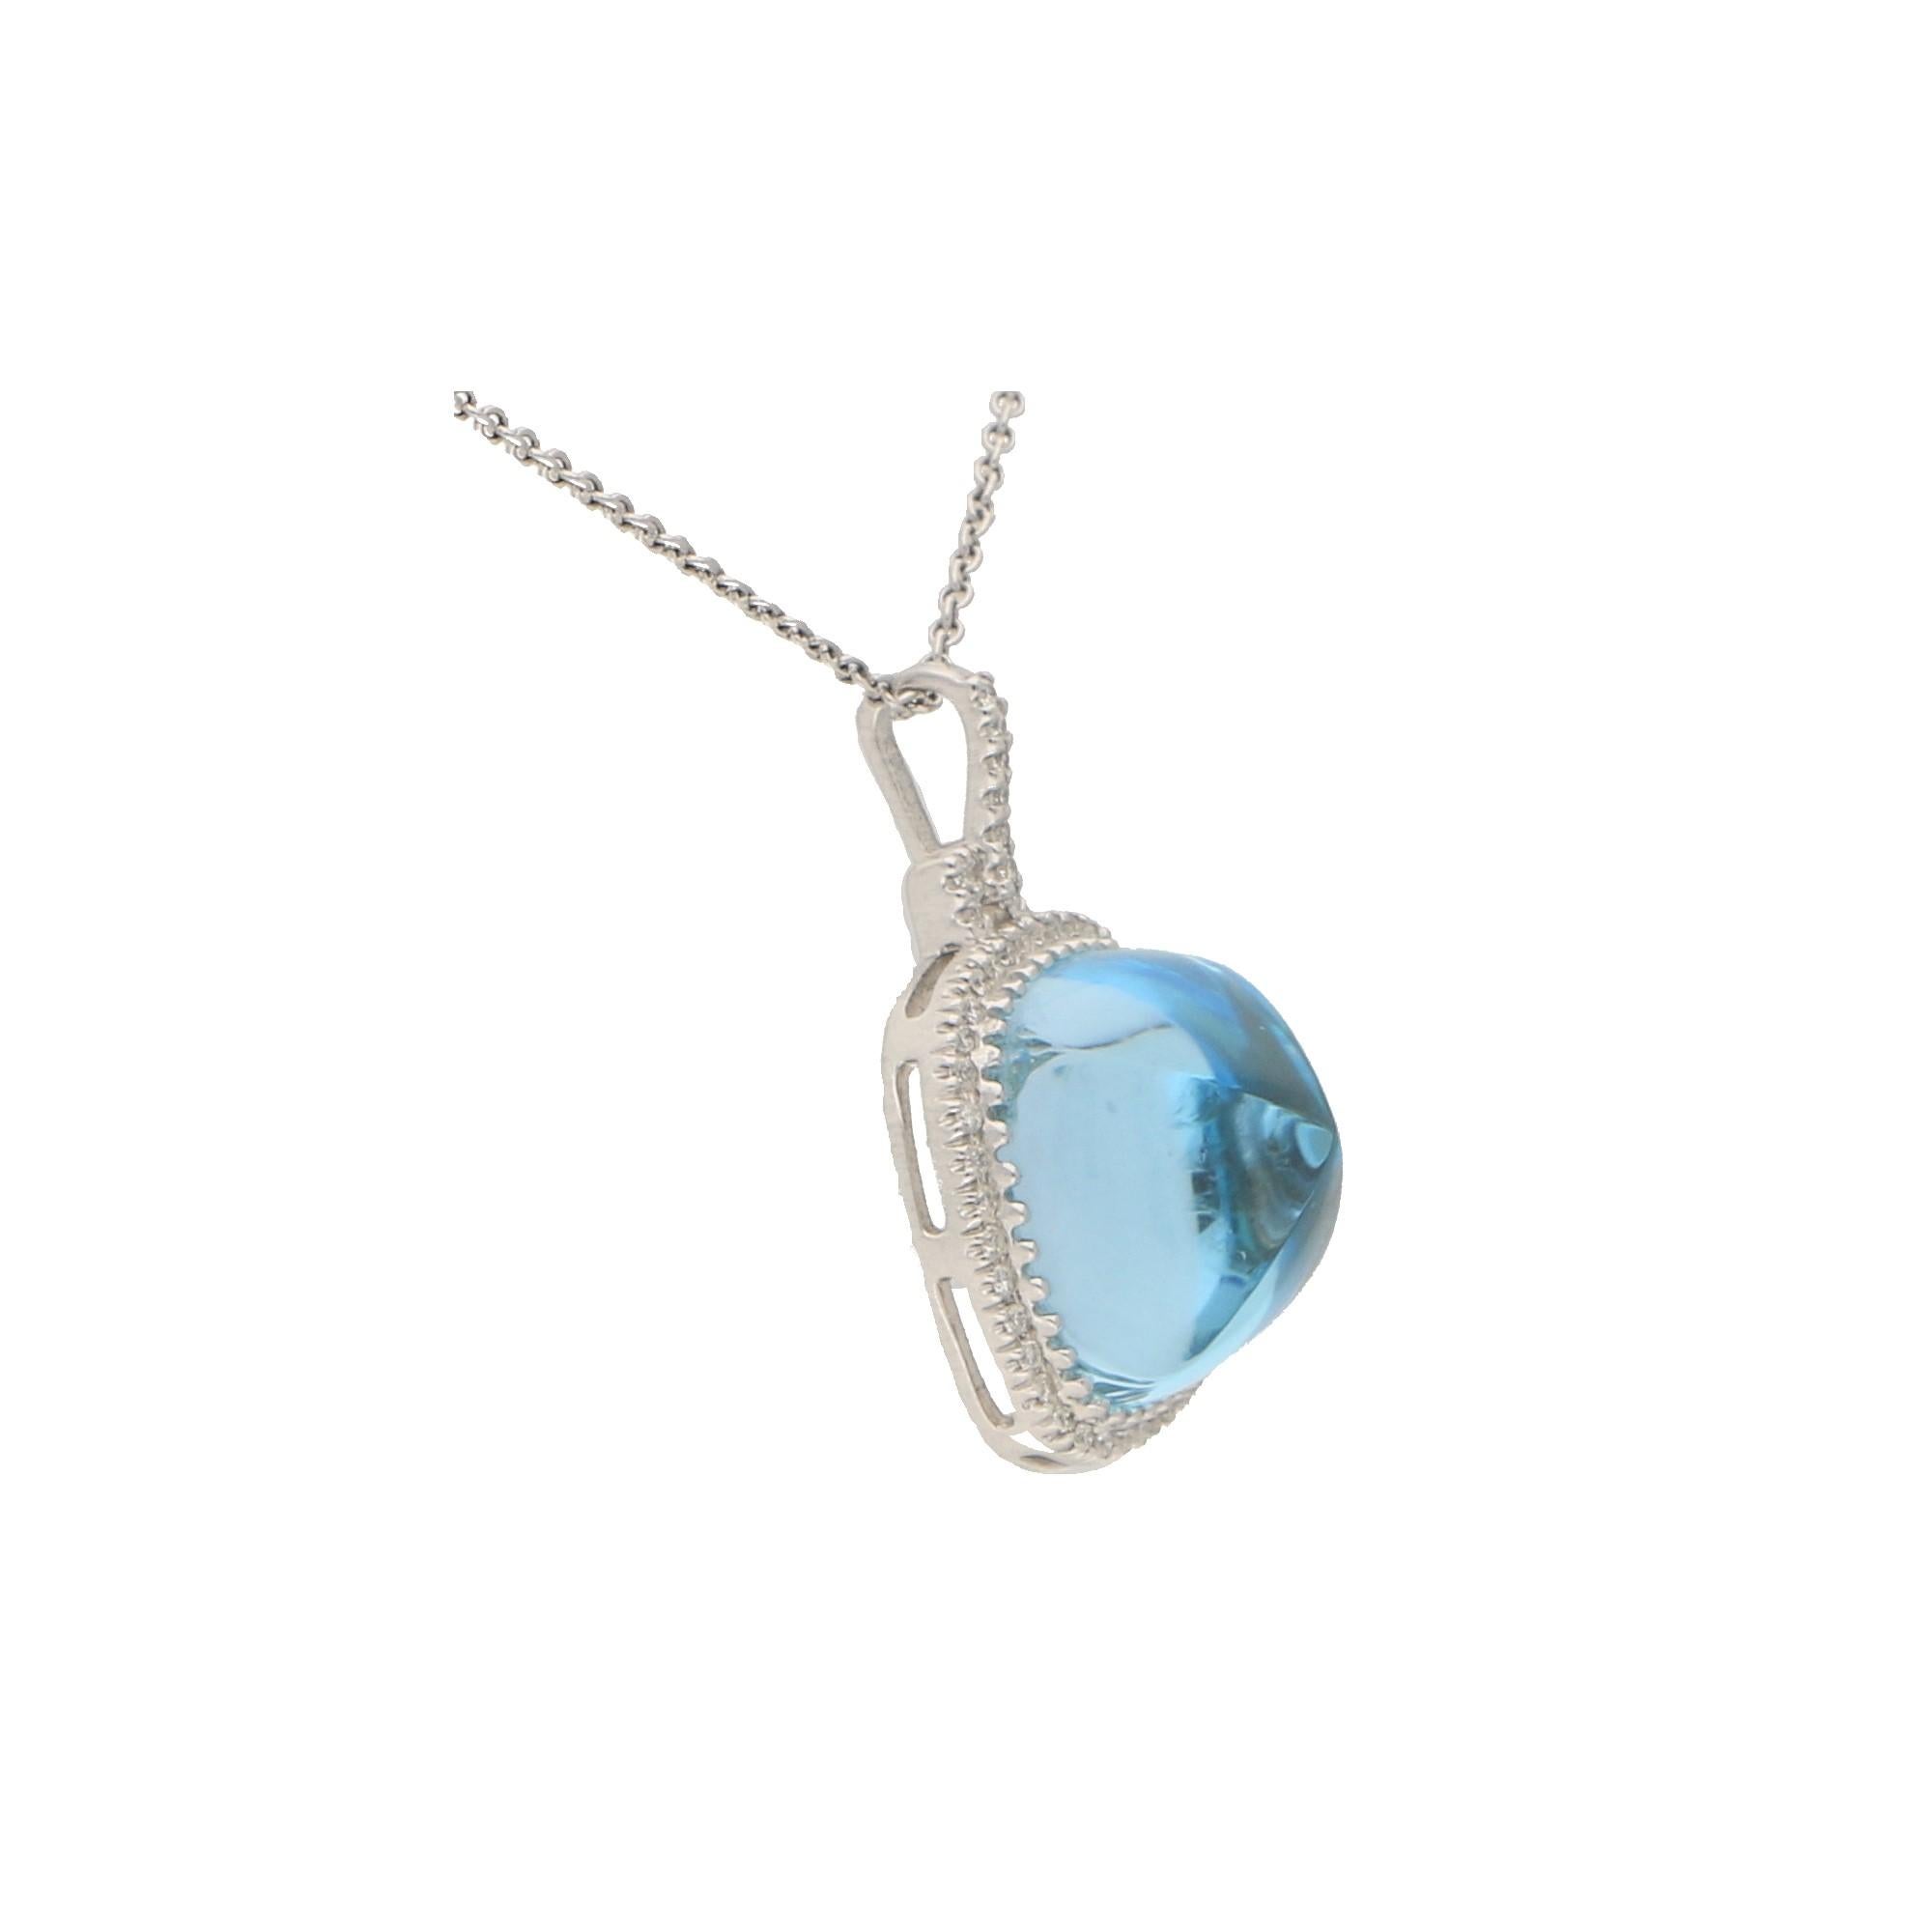 A vibrant blue topaz and diamond pendant necklace set in 18k white gold.

The pendant is centrally set with an astounding 16.15 carat sugar loaf cabochon blue topaz. This topaz has a gorgeous sky blue colour to it and this is enhanced further by a